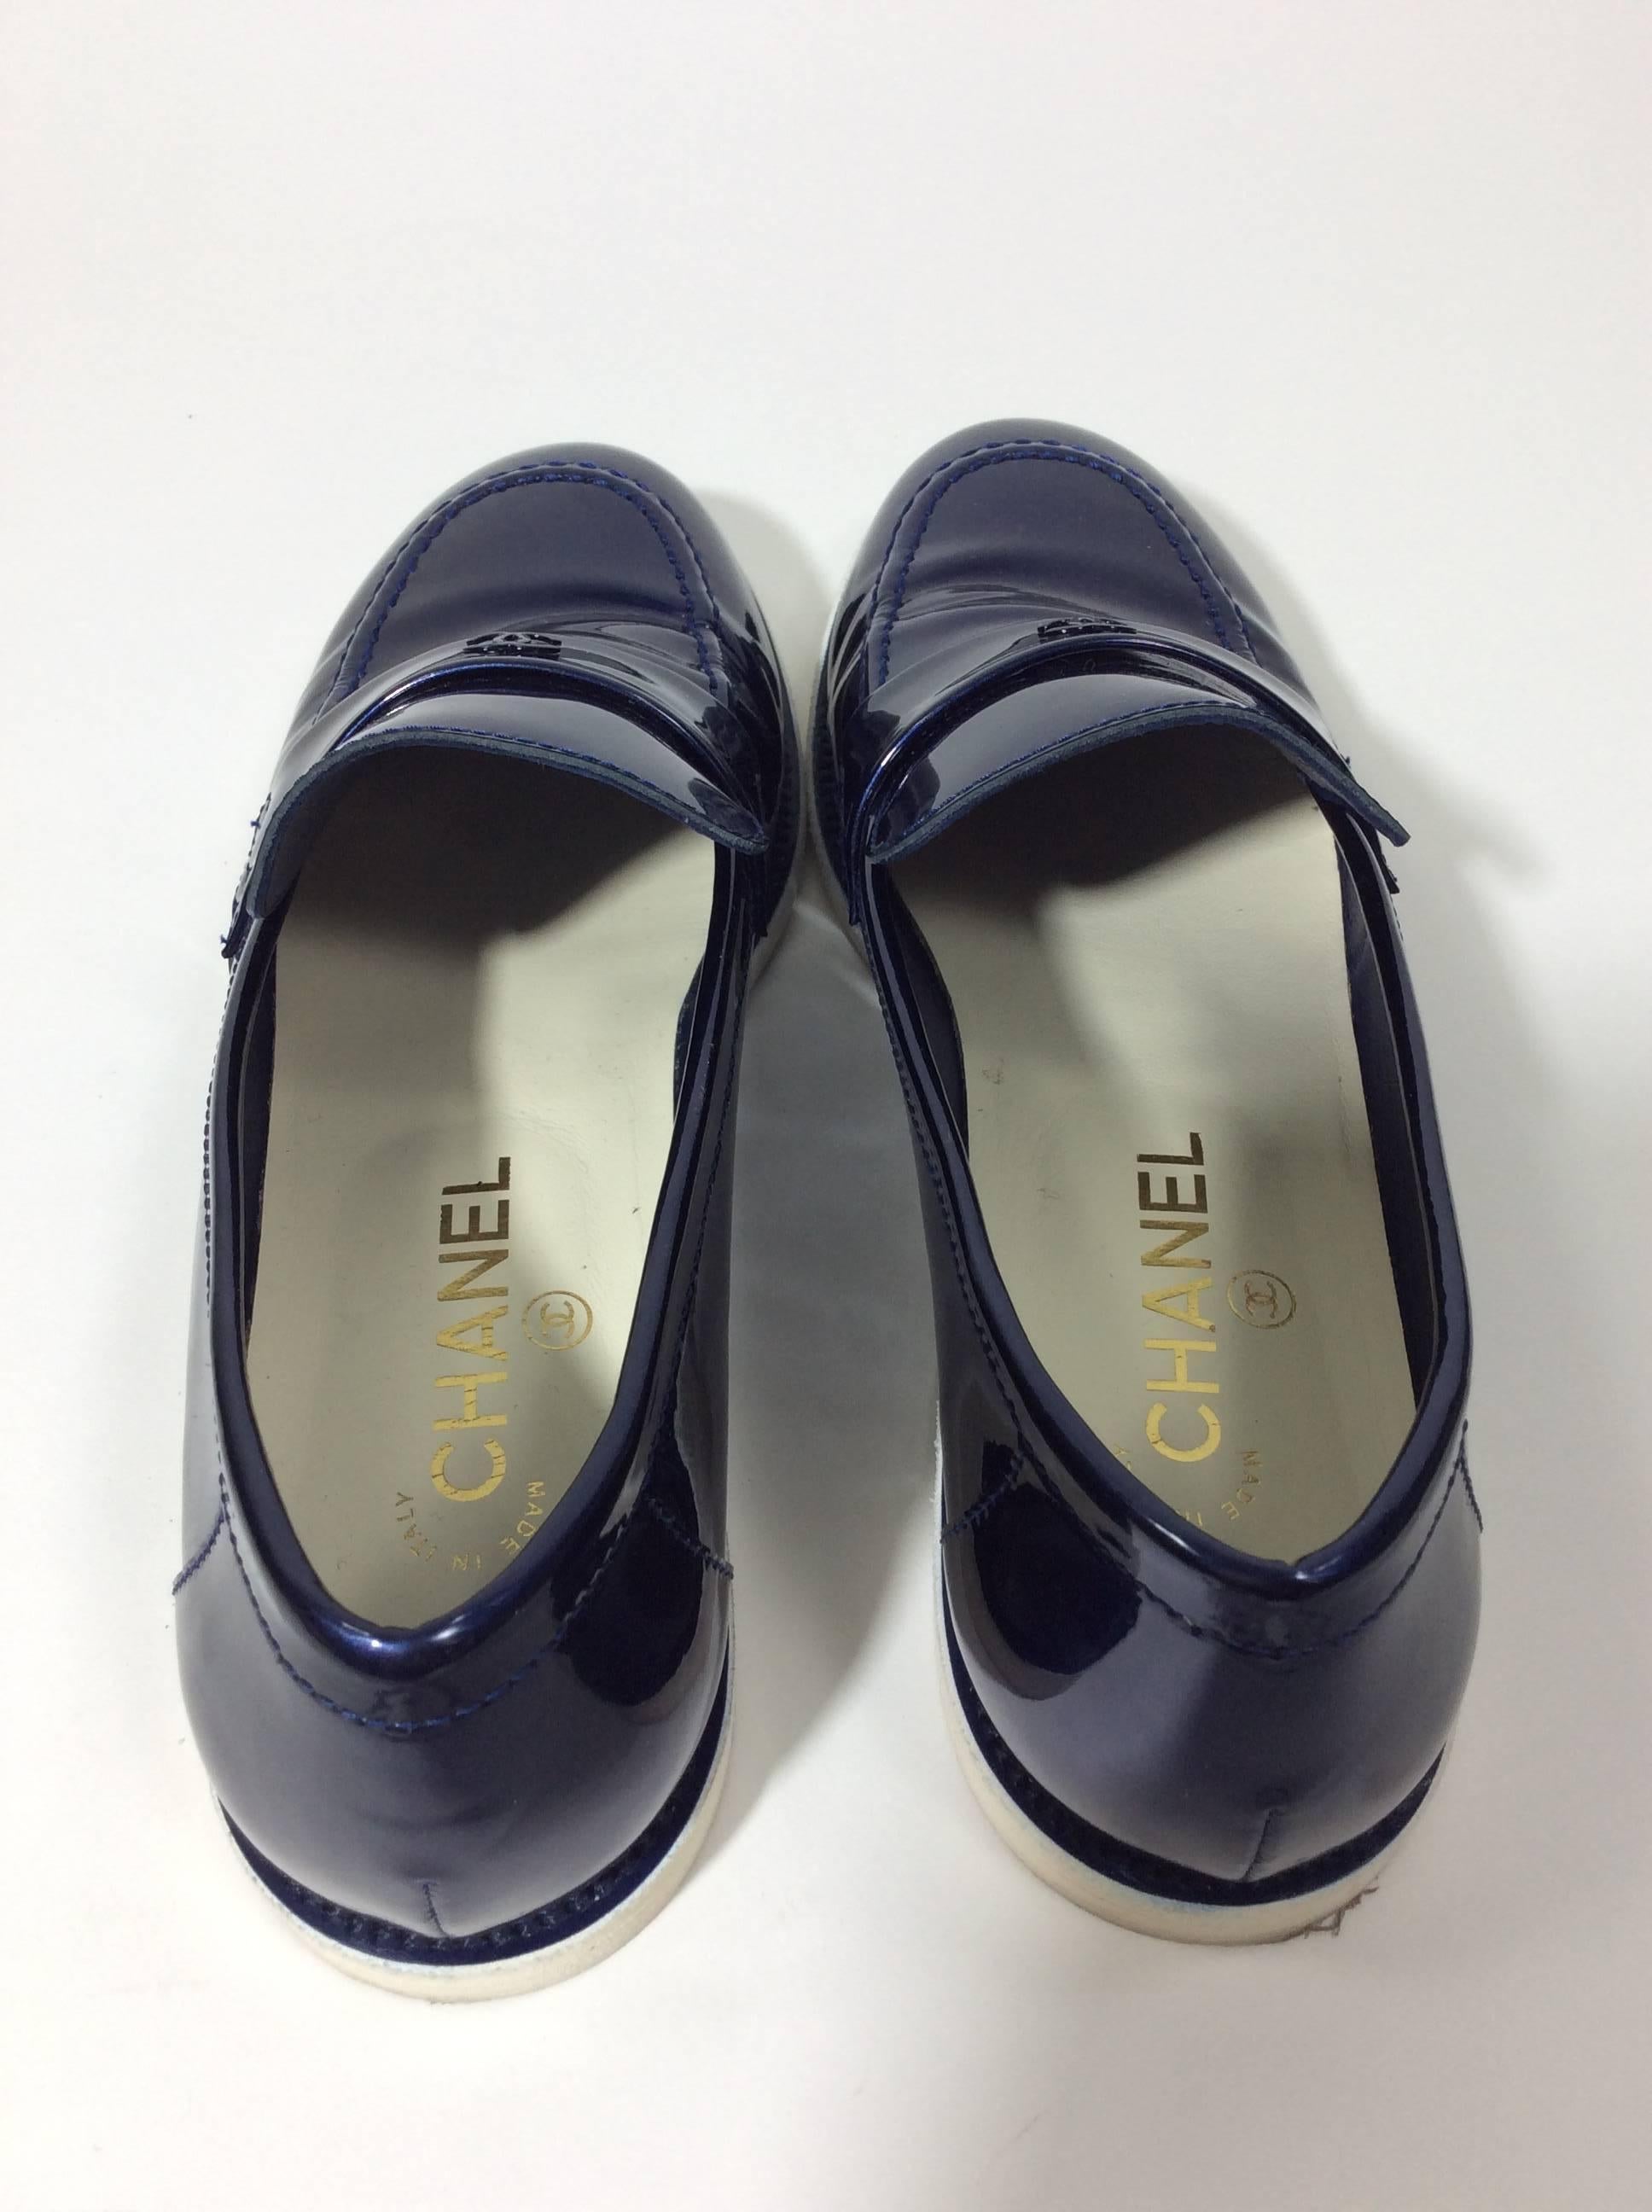 Chanel Patent Leather Midnight Blue Loafer Shoe In Excellent Condition For Sale In Narberth, PA